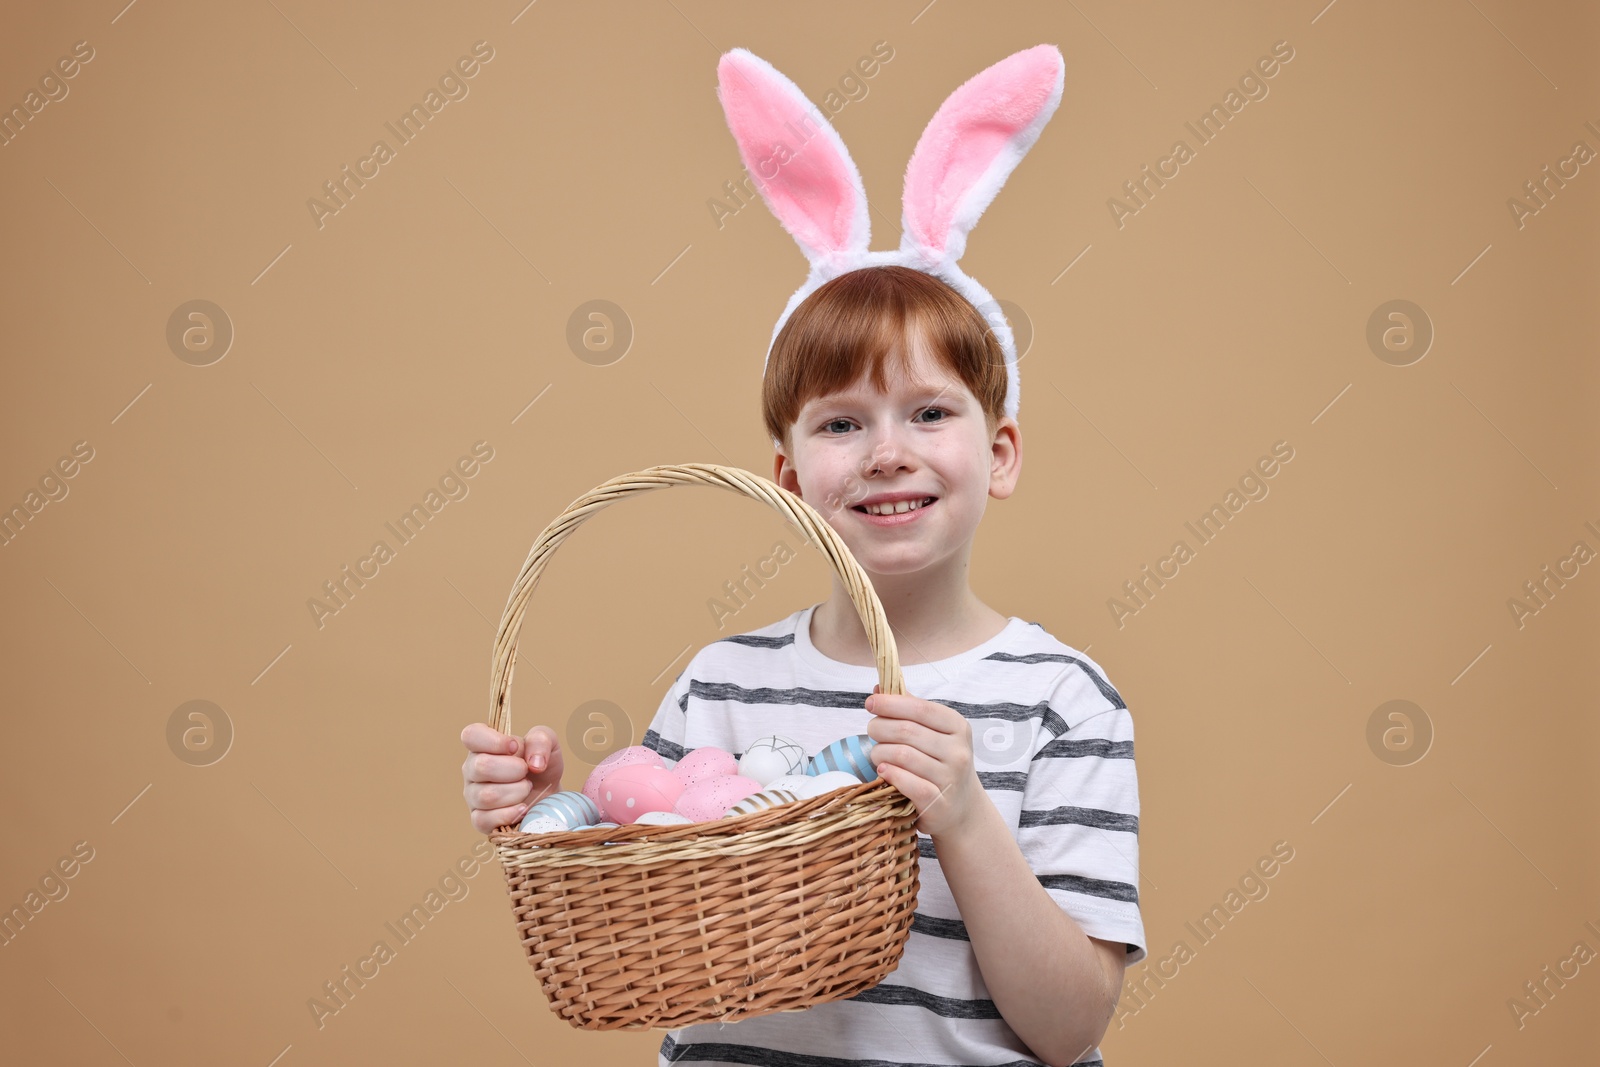 Photo of Easter celebration. Cute little boy with bunny ears and wicker basket full of painted eggs on dark beige background